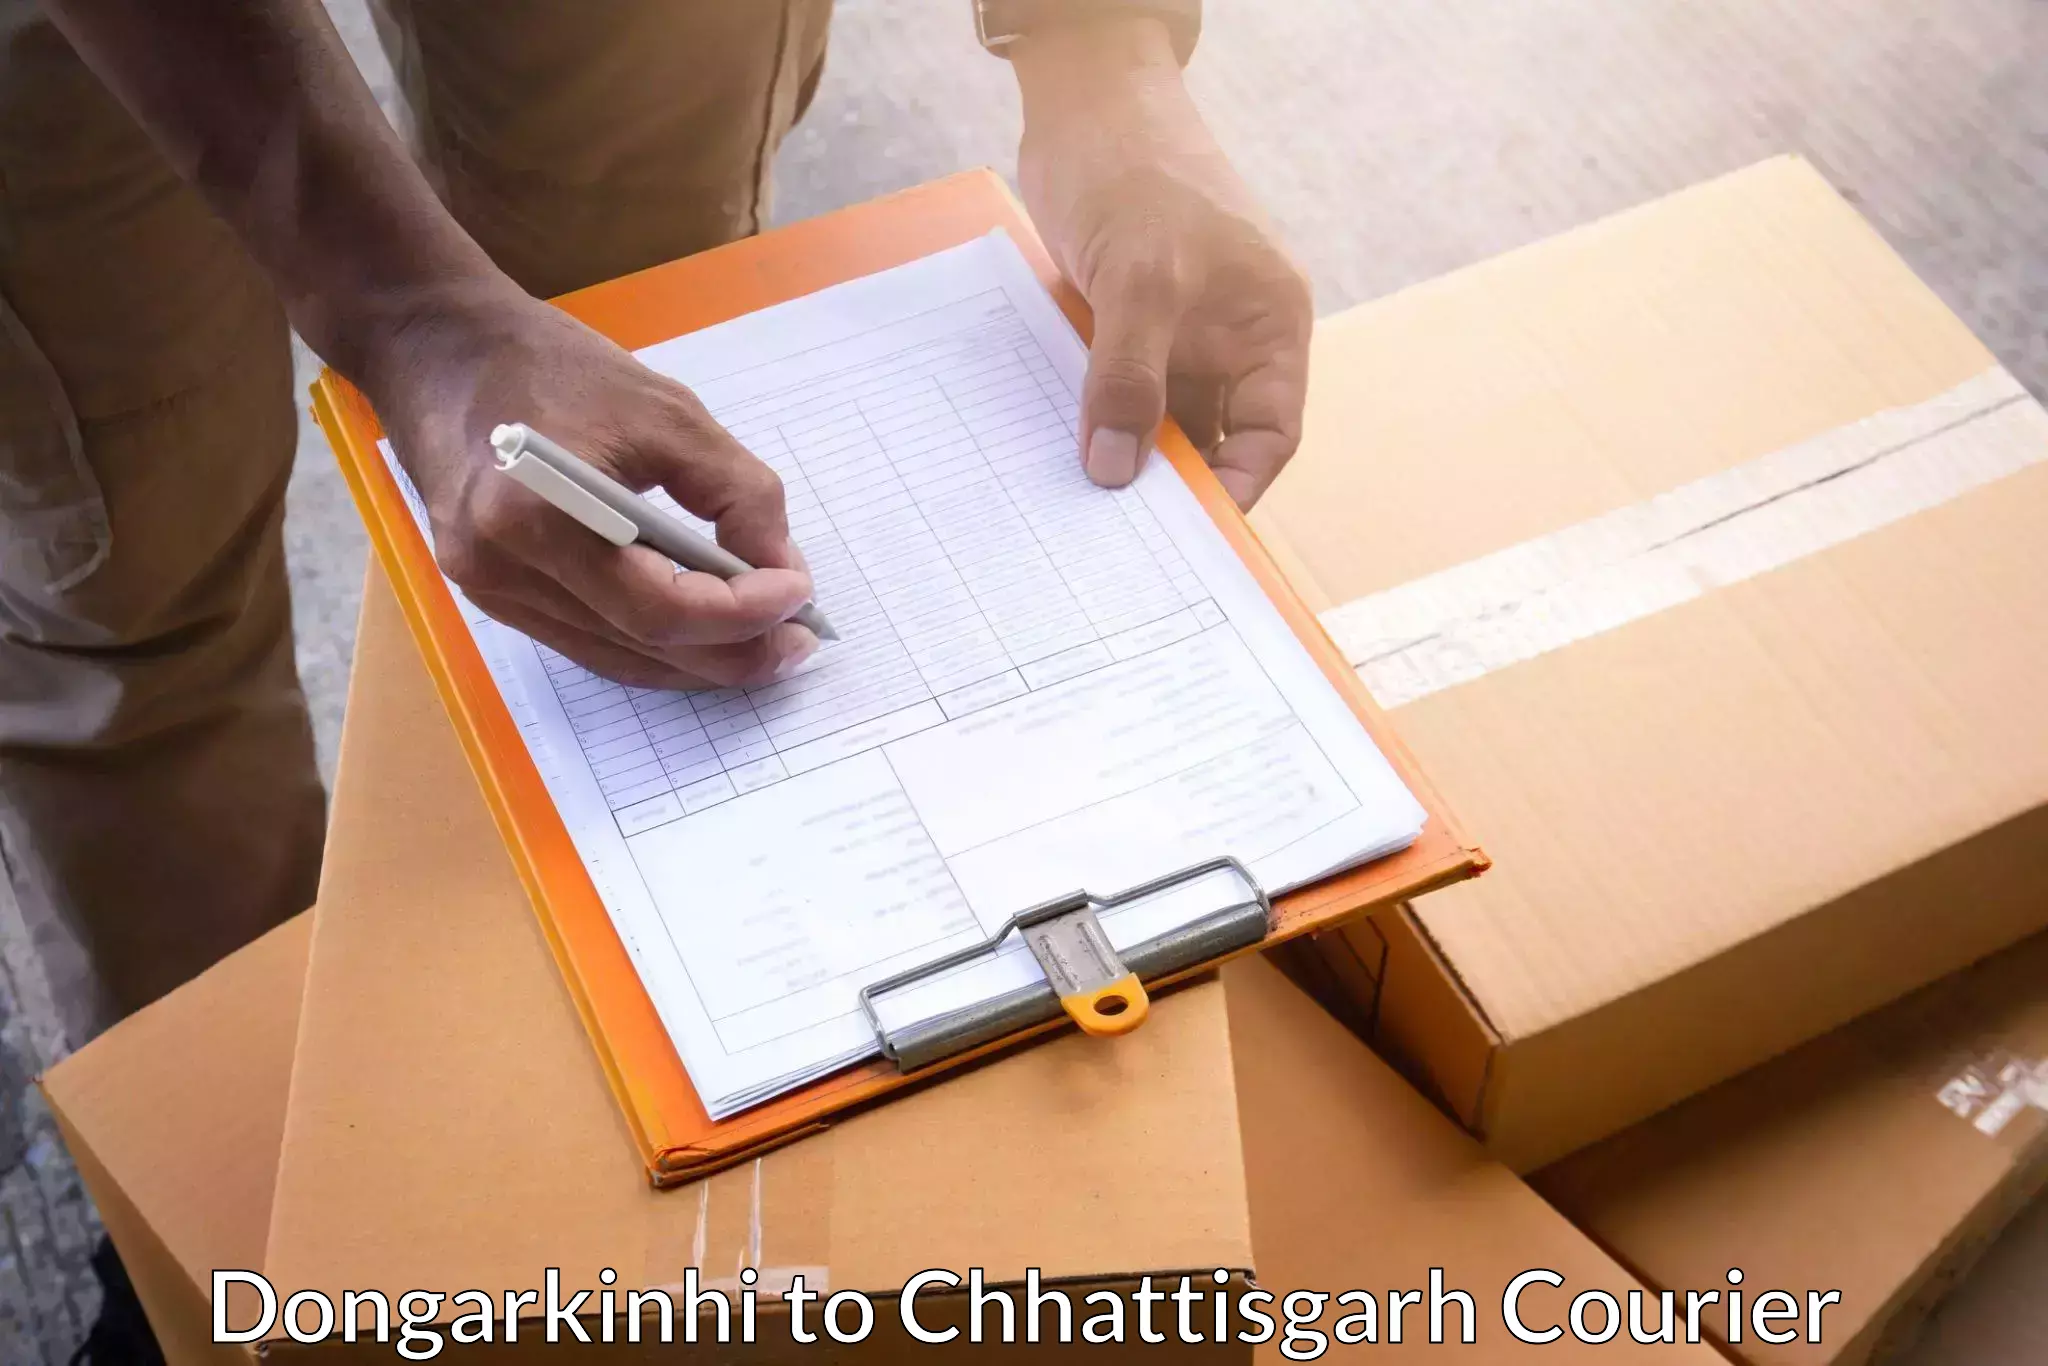 24/7 courier service Dongarkinhi to Bhilai